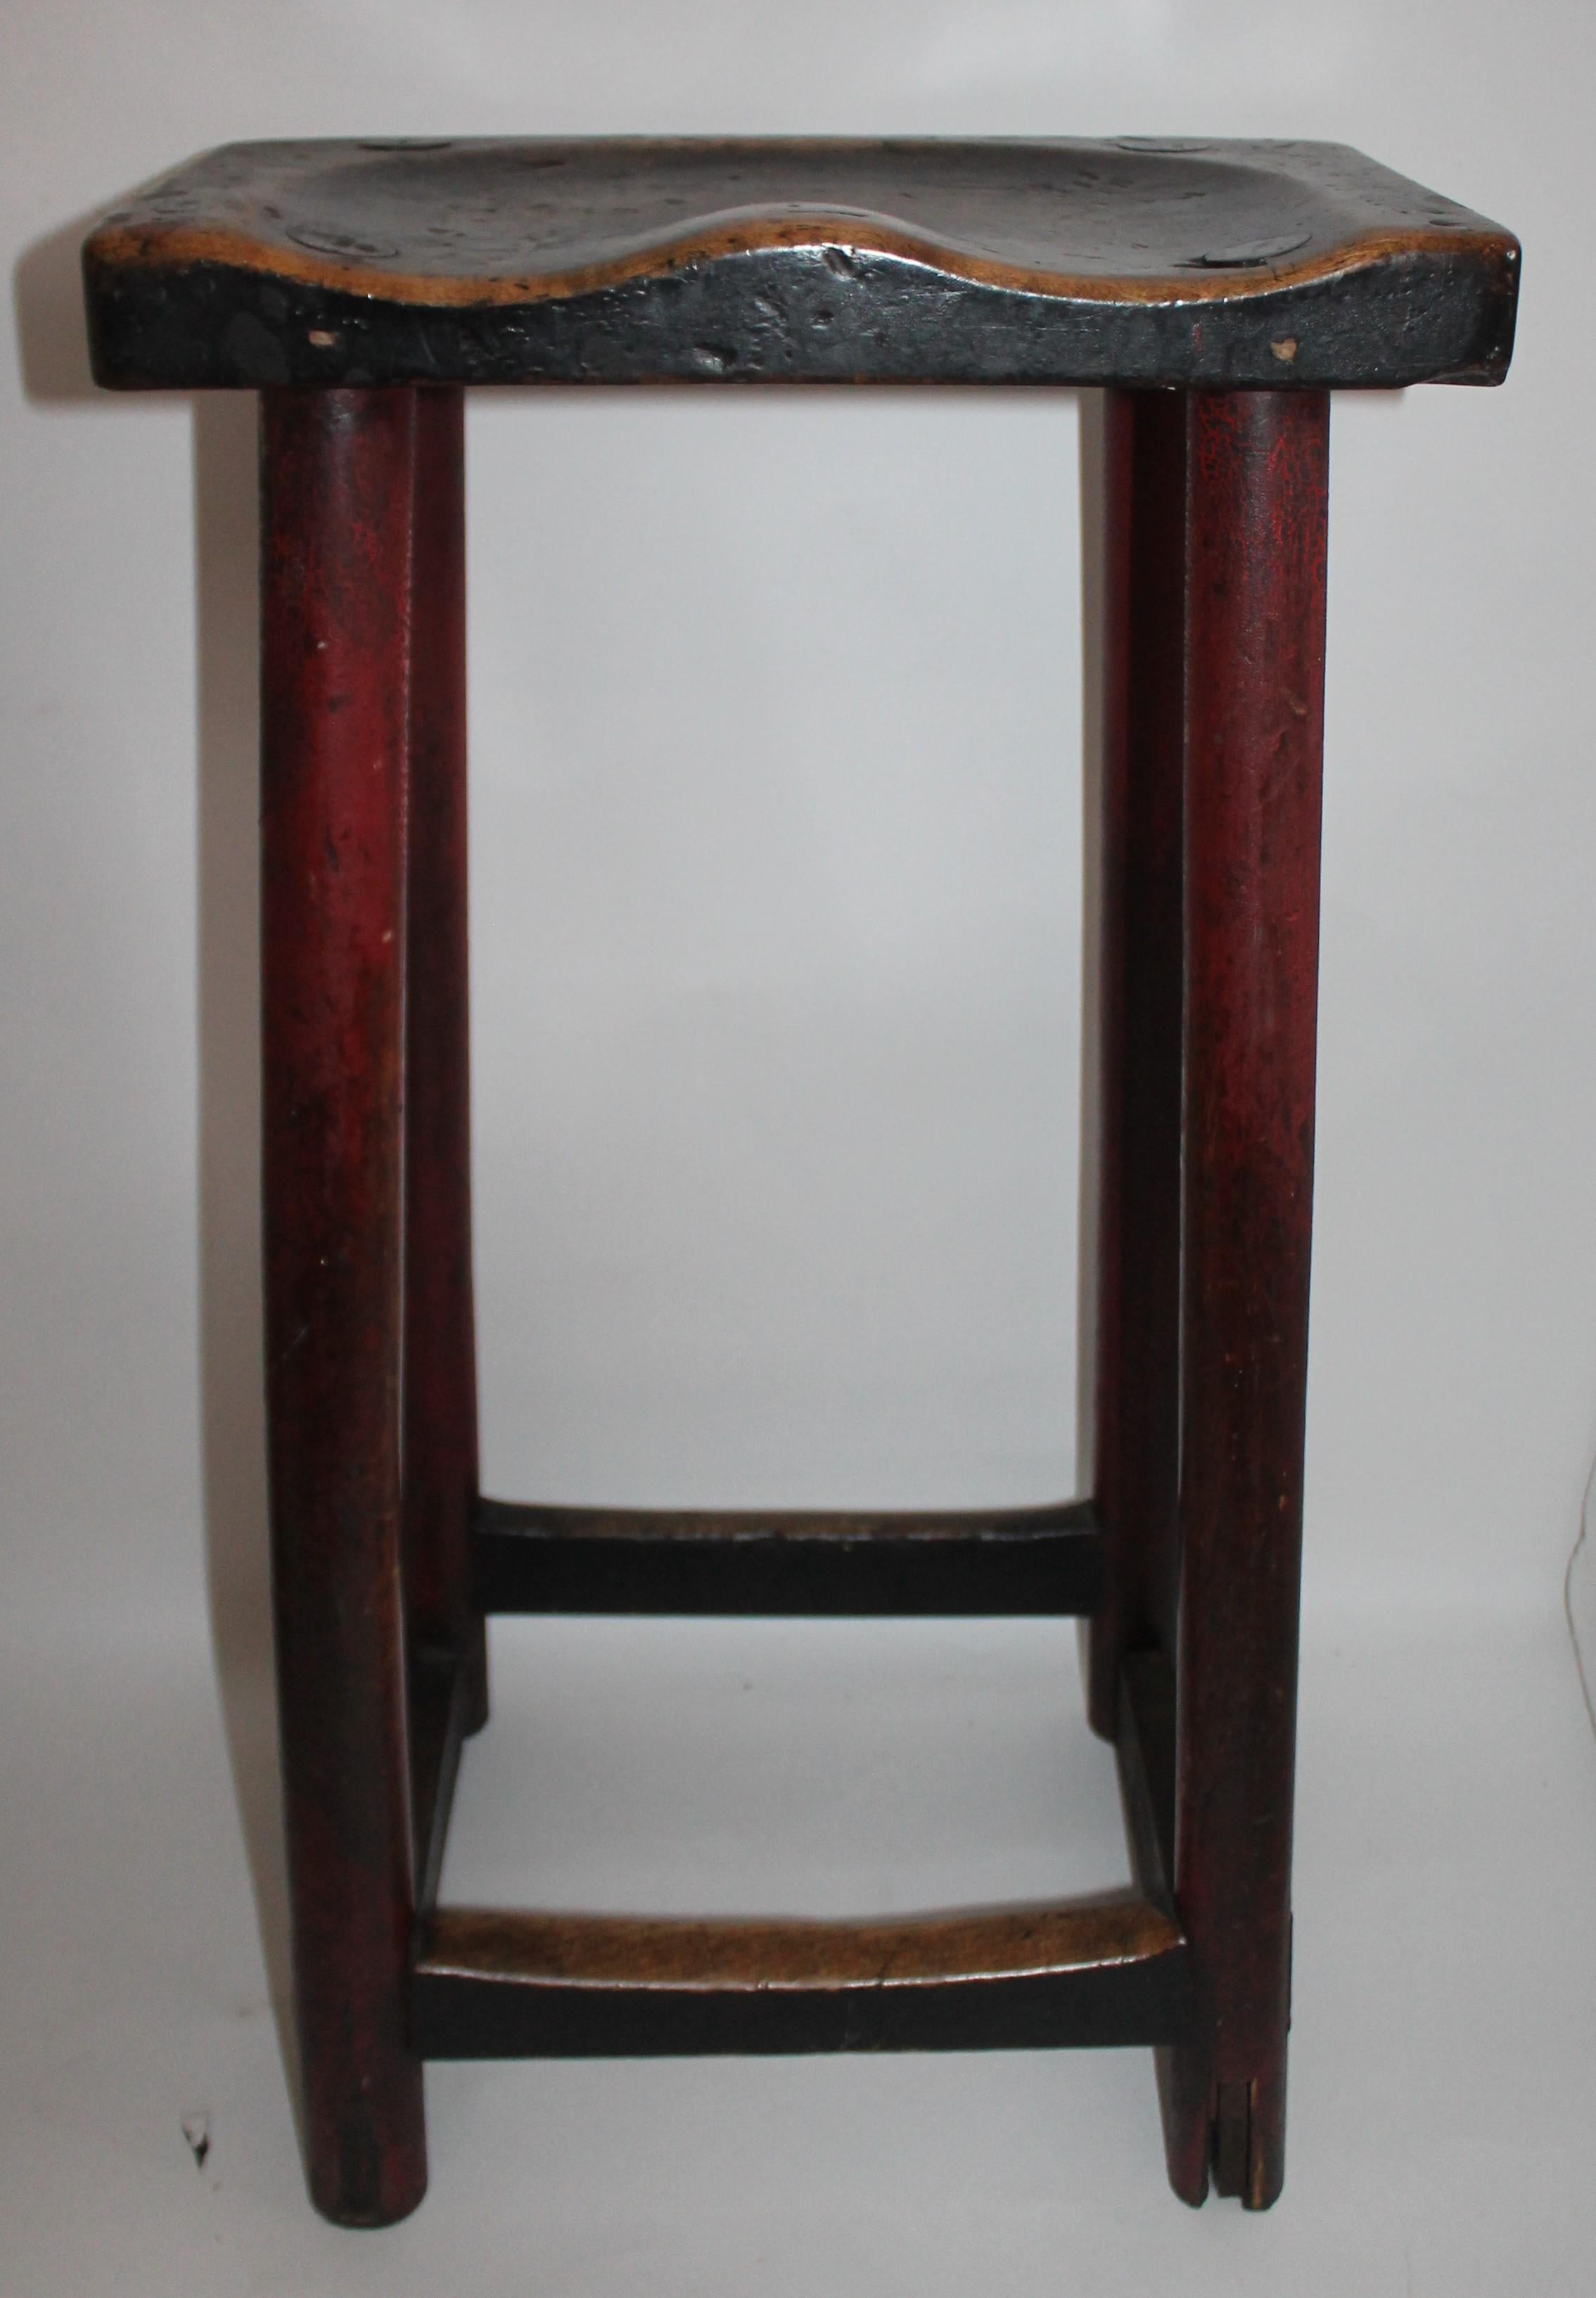 This amazing original red and black painted plank seat bar stool is in fine condition. This mortised and peg stool is sturdy and has a fine patina.